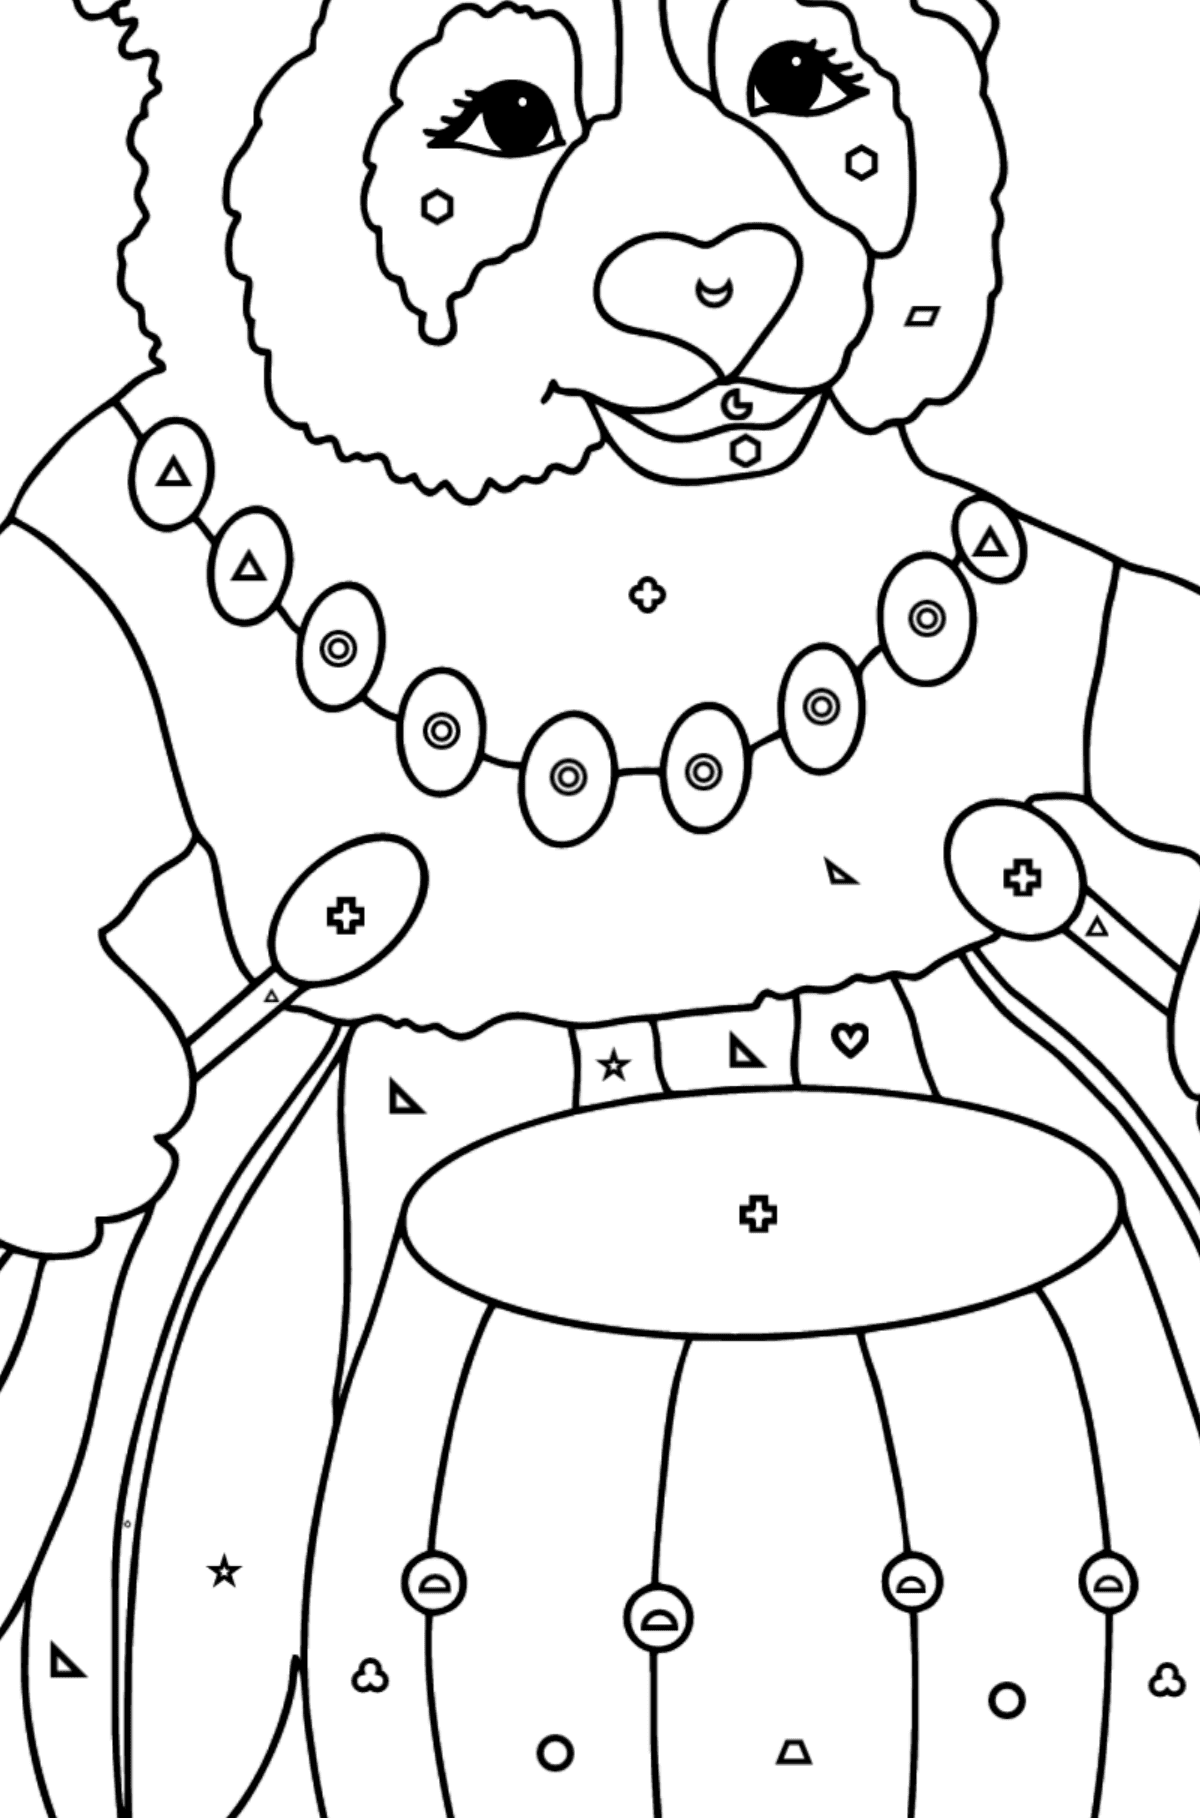 Panda For Kids (Hard) coloring page - Coloring by Geometric Shapes for Kids